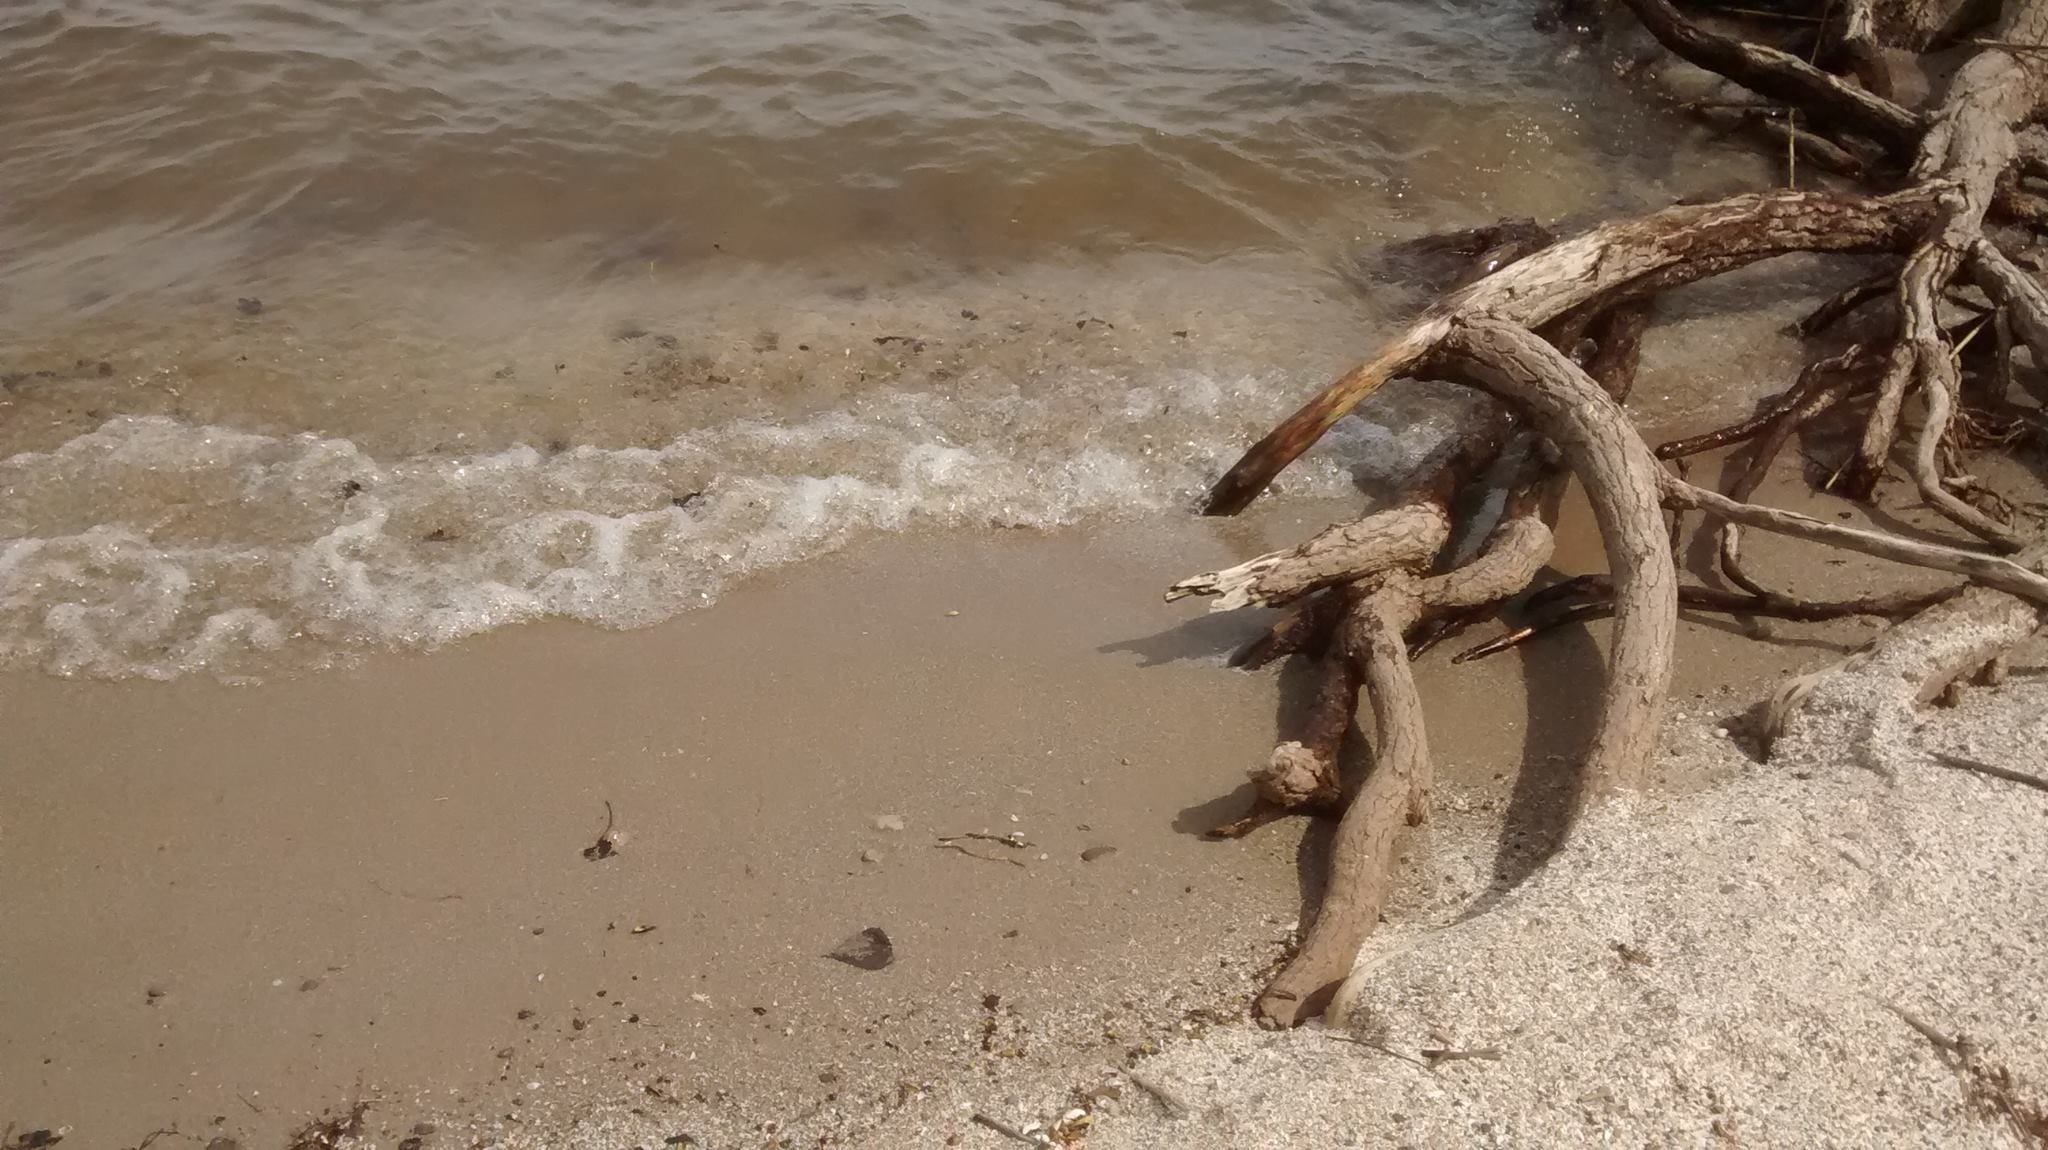 A small wave washes up on a sandy beach, with some driftwood nearby.